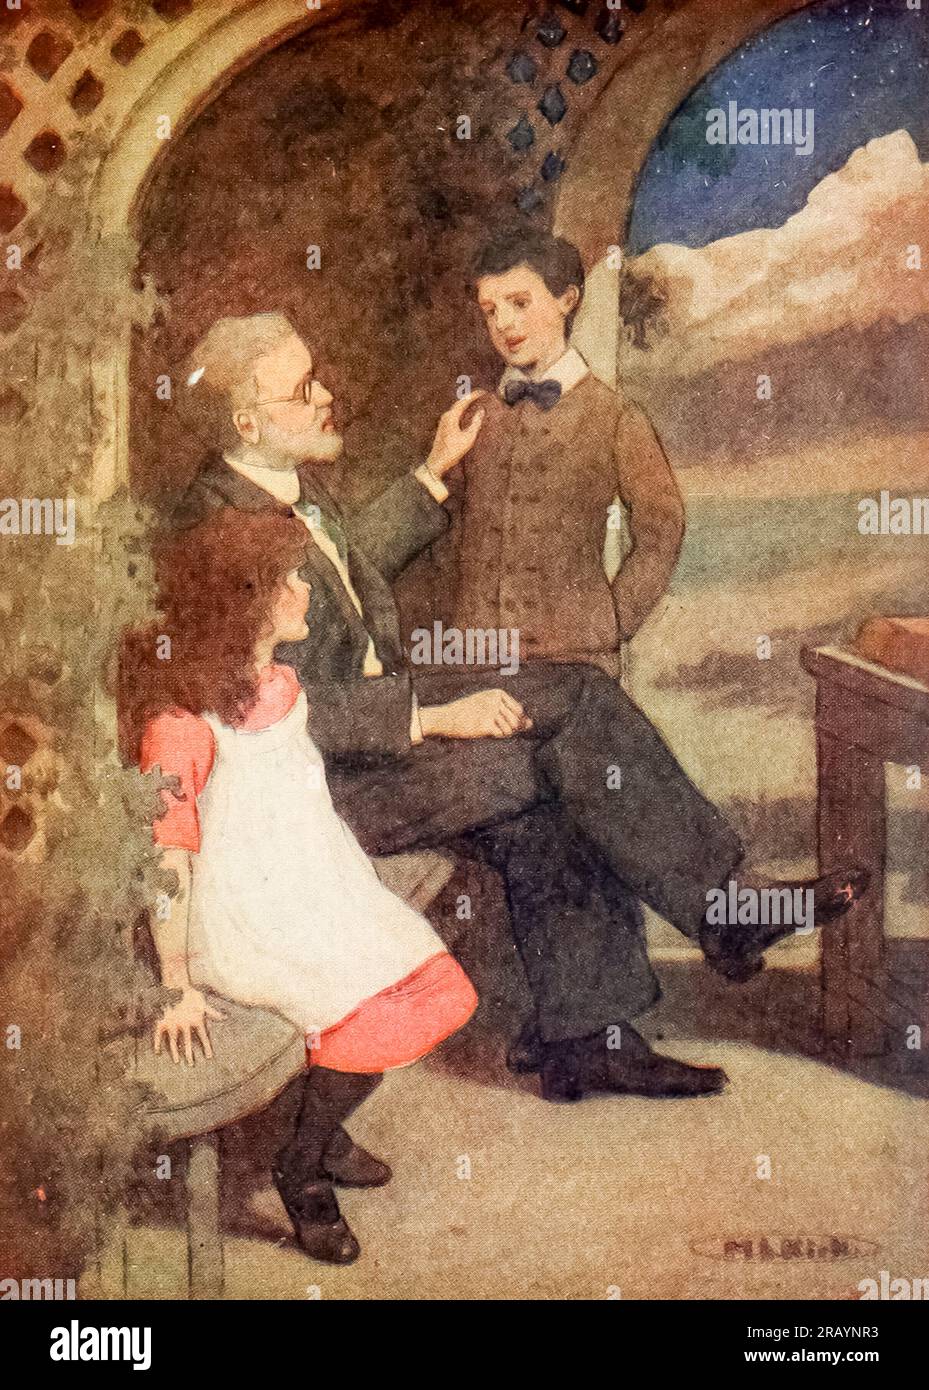 I suppose it is patrimony, my son, said Mr. Titus, patting Rolf's shoulder illustrated by Maria L. Kirk from the book ' Dora ' by Spyri, Johanna, 1827-1901 Publication date 1924 Publisher Philadelphia & London, J.B. Lippincott Johanna Louise Spyri (12 June 1827 – 7 July 1901) was a Swiss author of novels, notably children's stories. She wrote the popular book Heidi. Born in Hirzel, a rural area in the canton of Zürich, as a child she spent several summers near Chur in Graubünden, the setting she later would use in her novels. Stock Photo